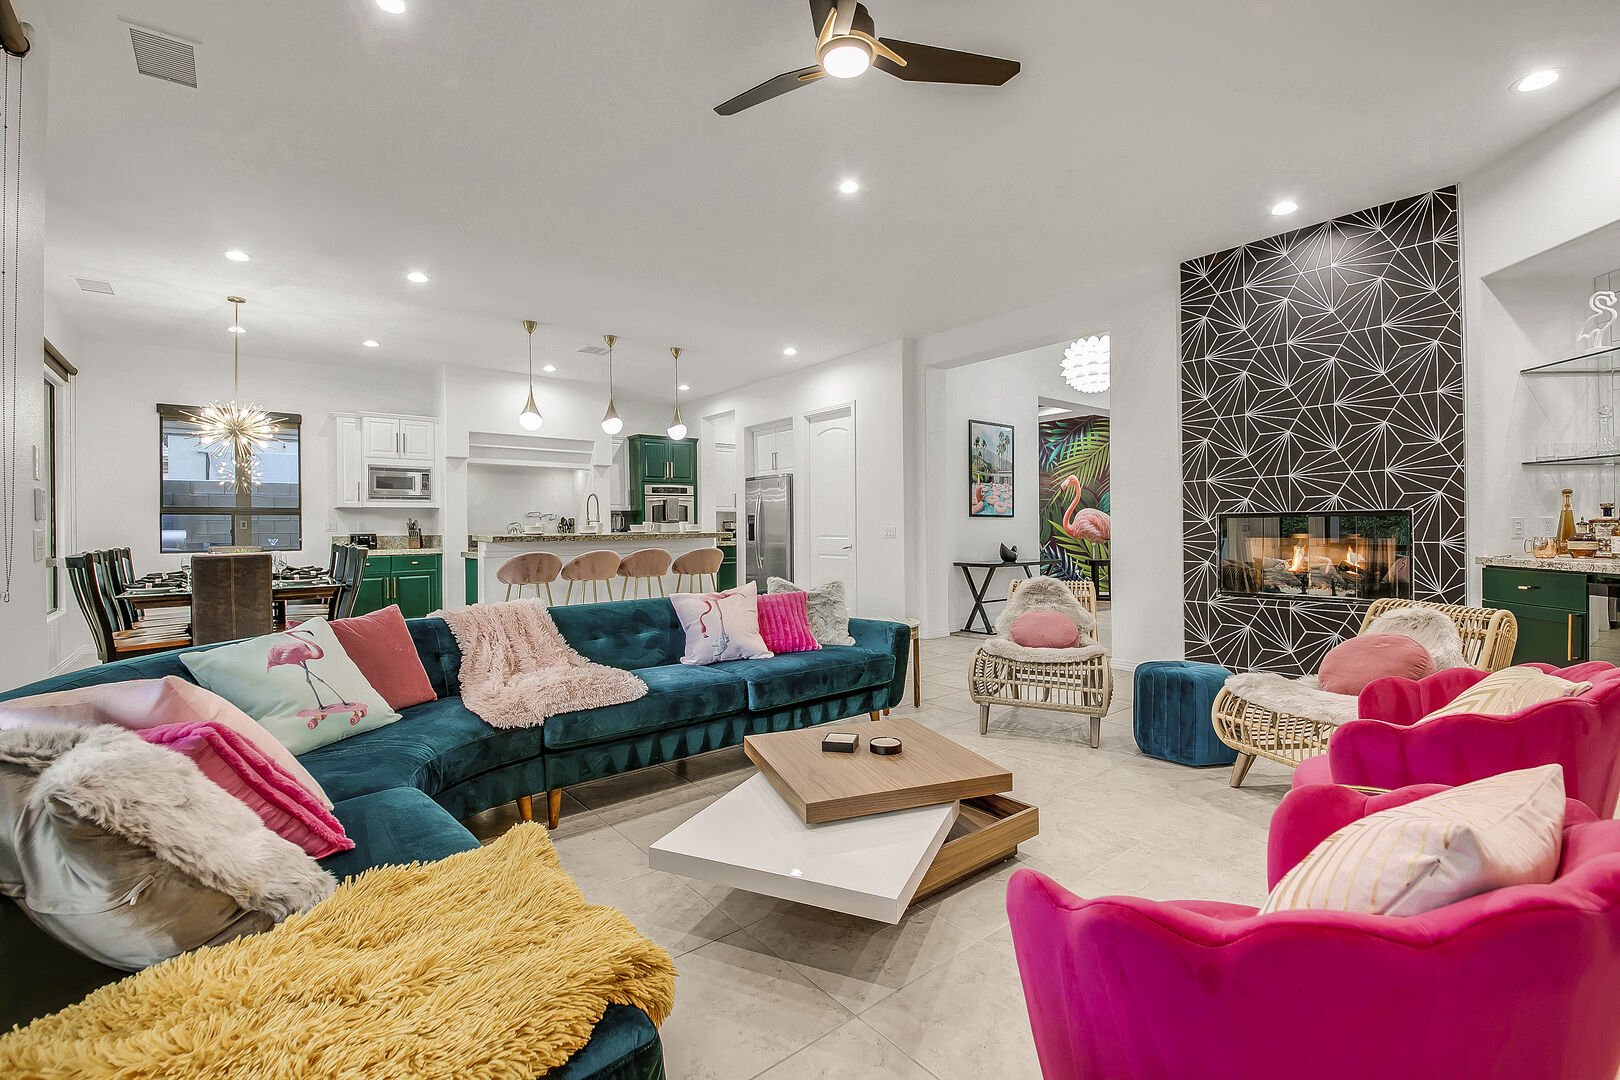 Enjoy the family room which seats 10 and features a cozy fire place, wine cooler, record player, books, and a bar area perfect for you to show off your mixology skills.